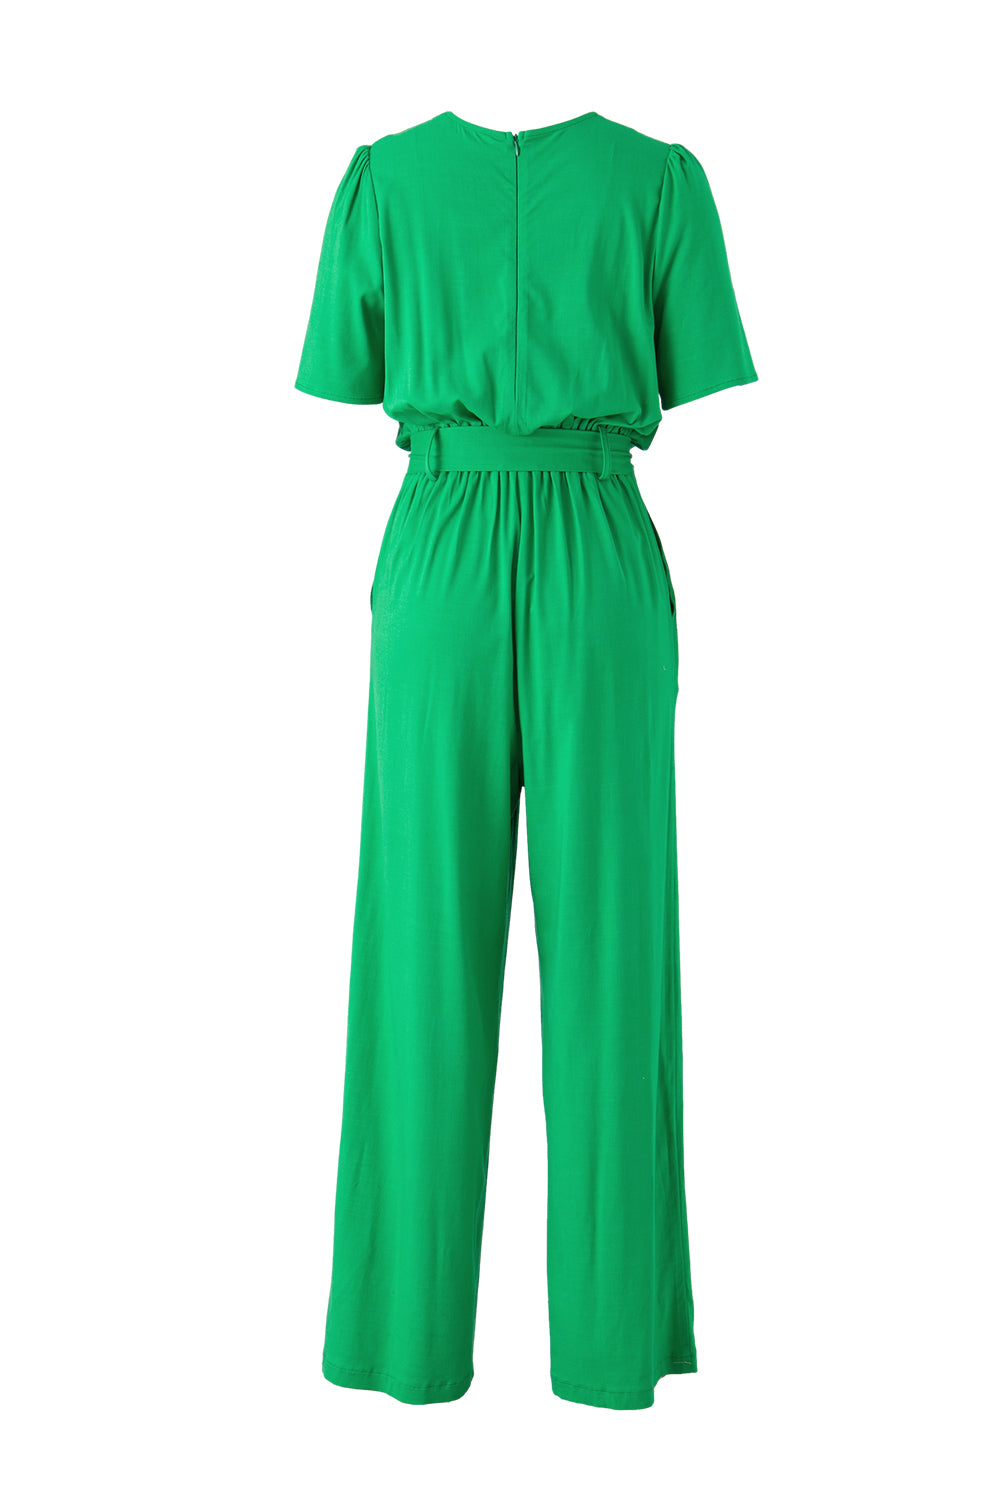 Money Green with Class Belted Jumpsuit